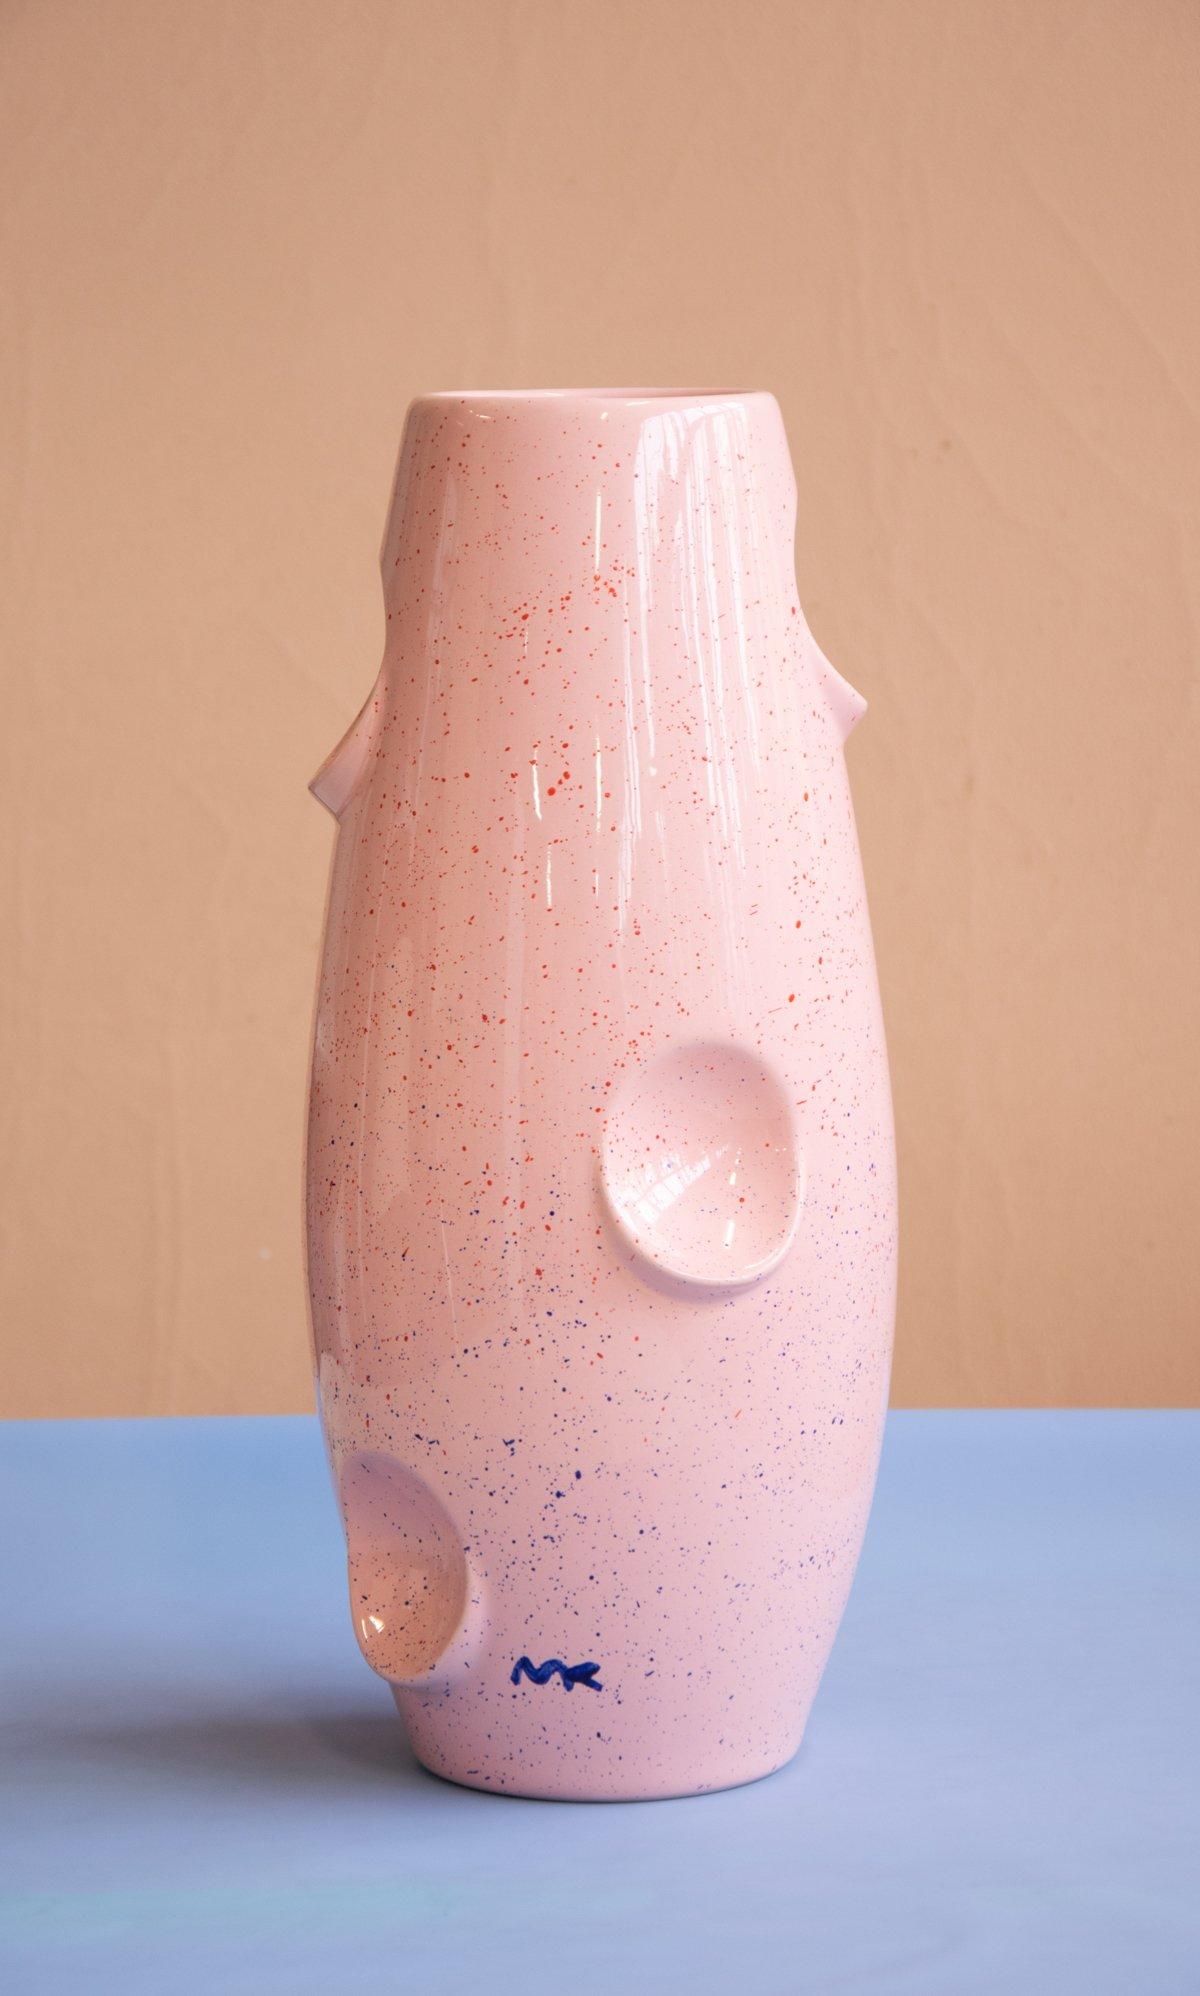 OKO was the first and gave its name to the entire family. First presented in 2014 as part of the Tokyo Designers Week. Since then, it has appeared in numerous variations and collections decorated and painted by the author's hand. The OKO vase has